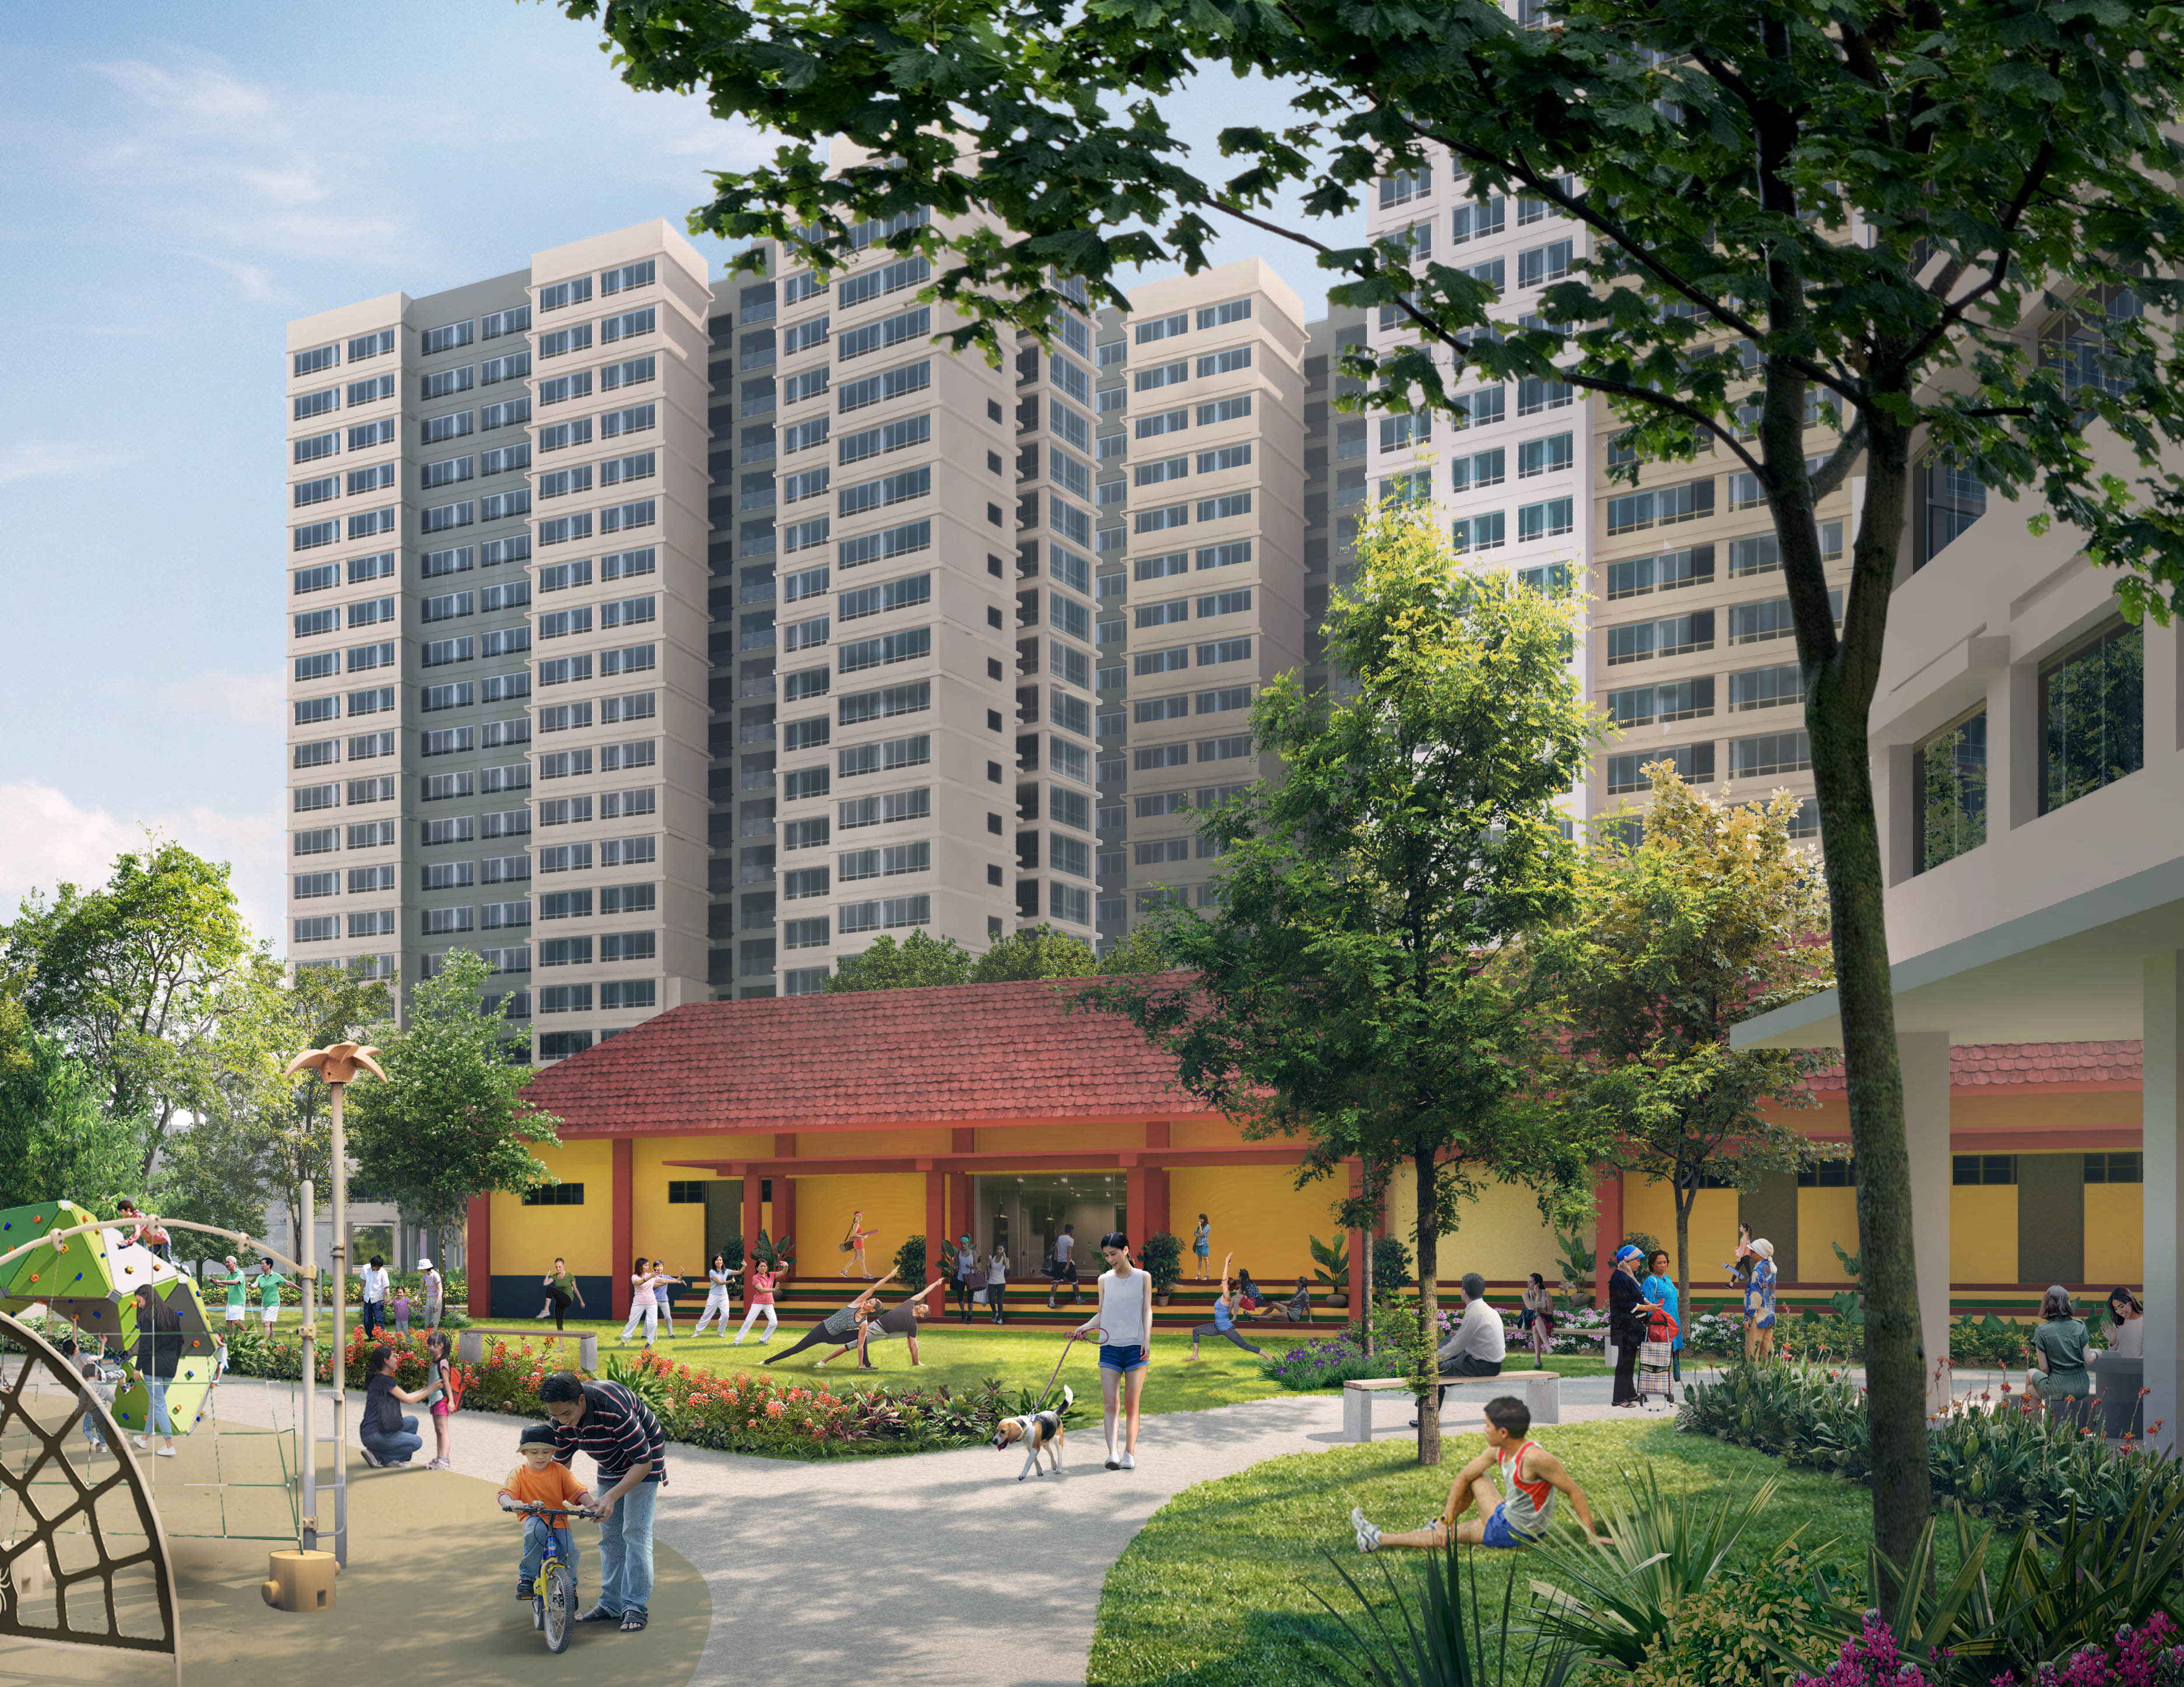 An artist’s impression of one of the upcoming public housing projects at Farrer Park. The retained boxing gym (in yellow) will be converted to a community sports facility.